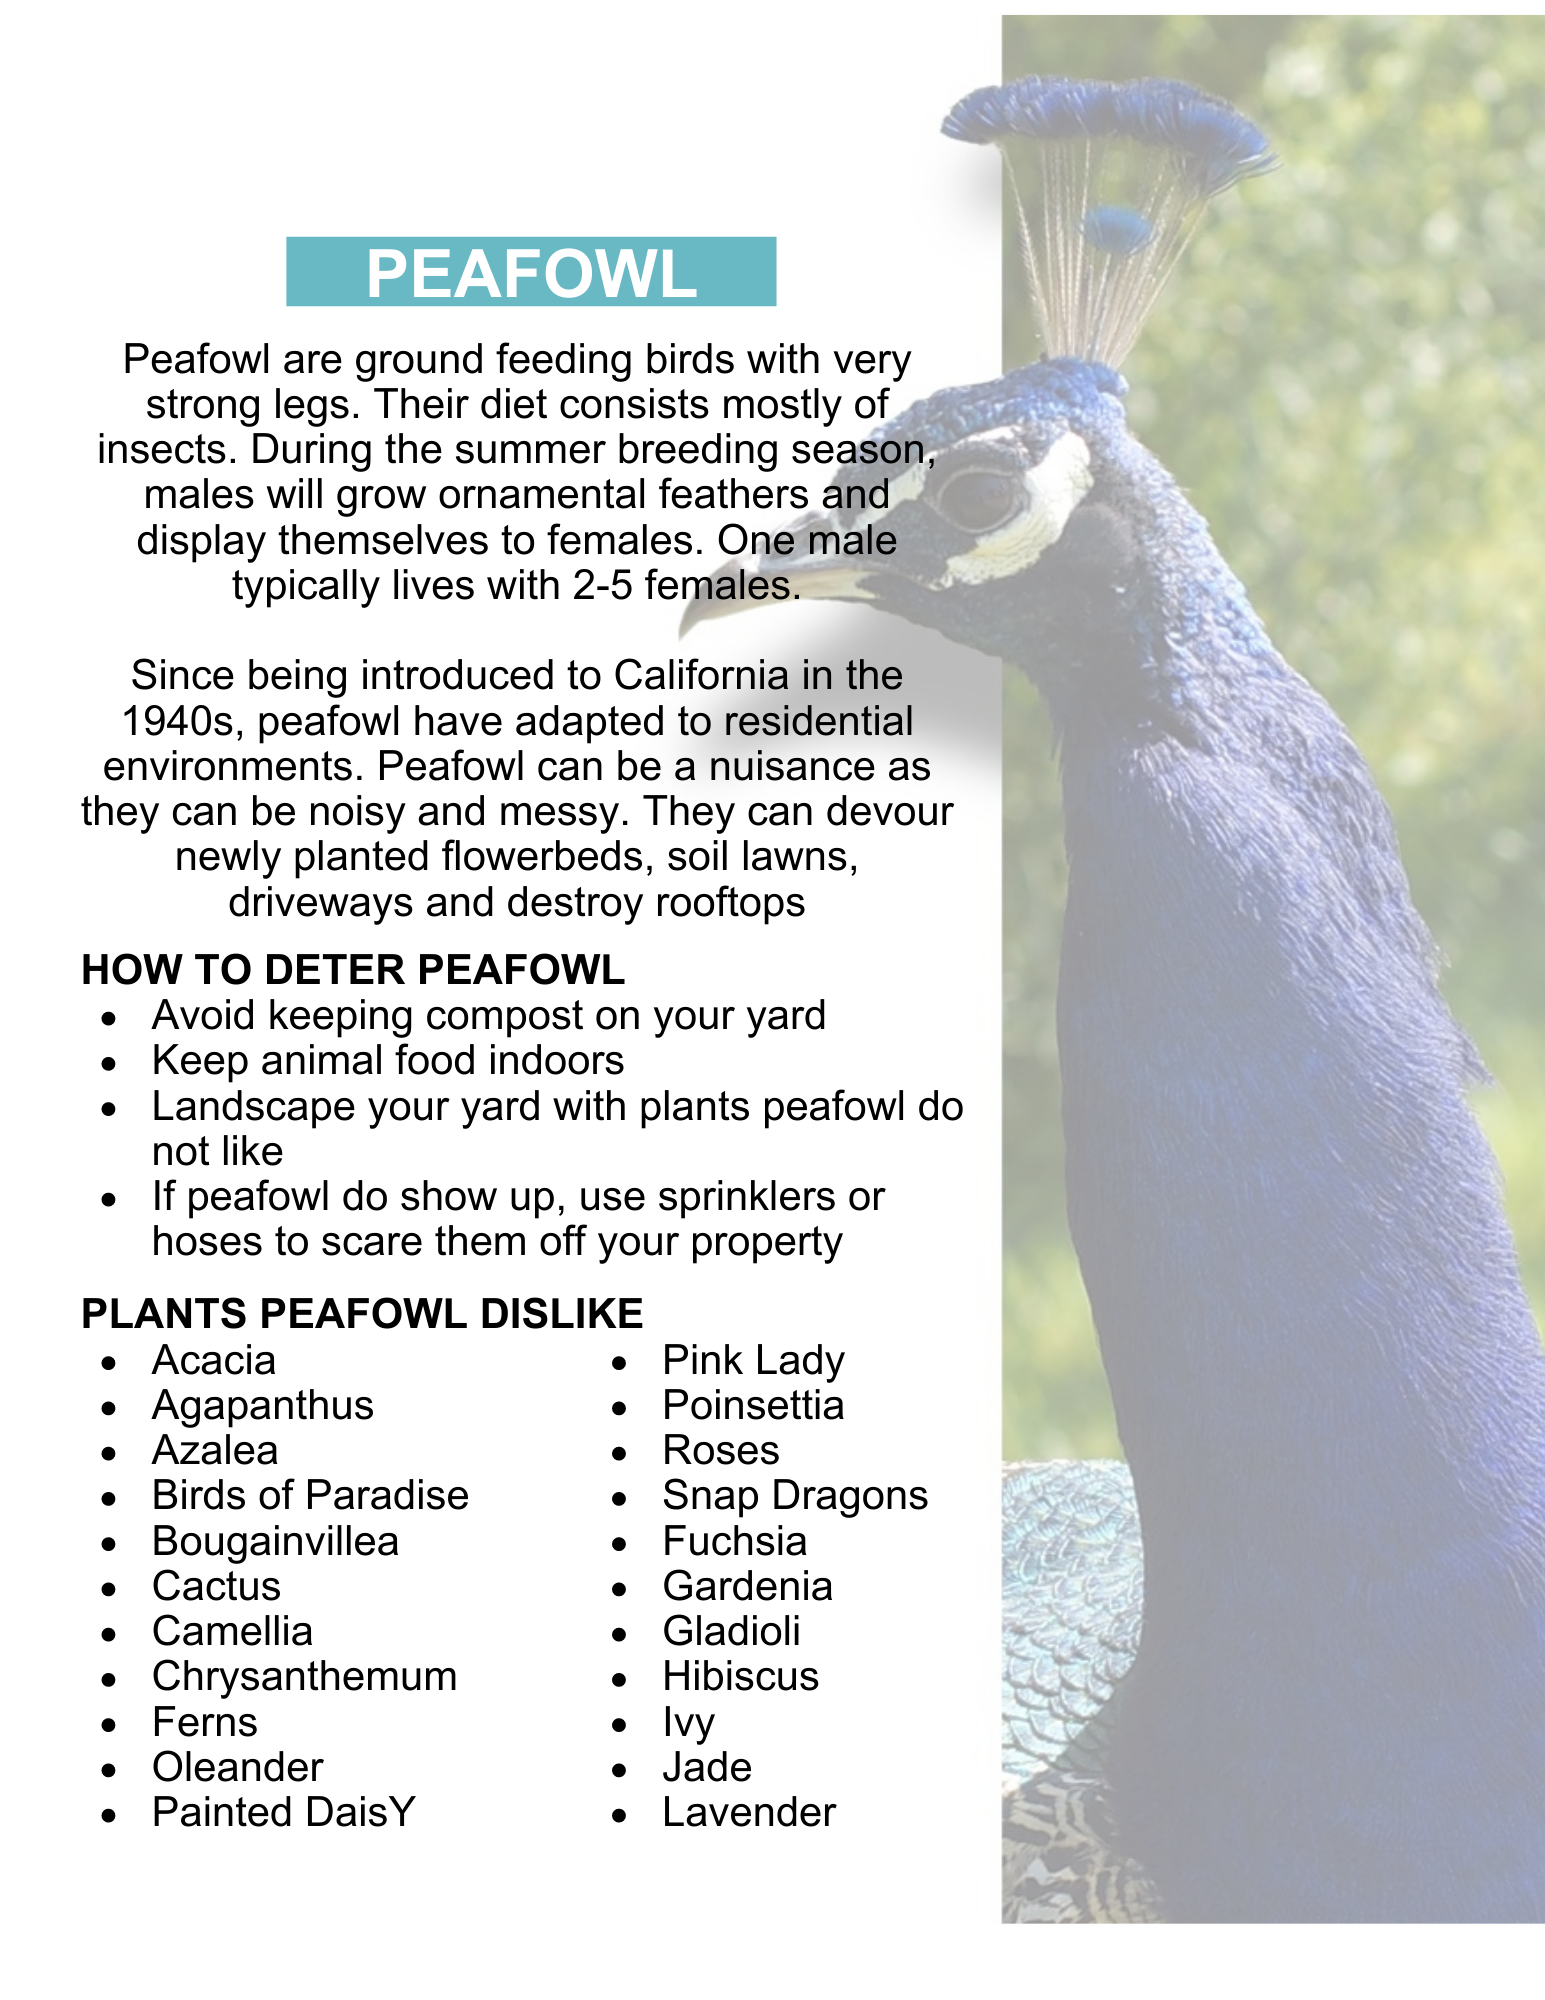 how to deter peafowl